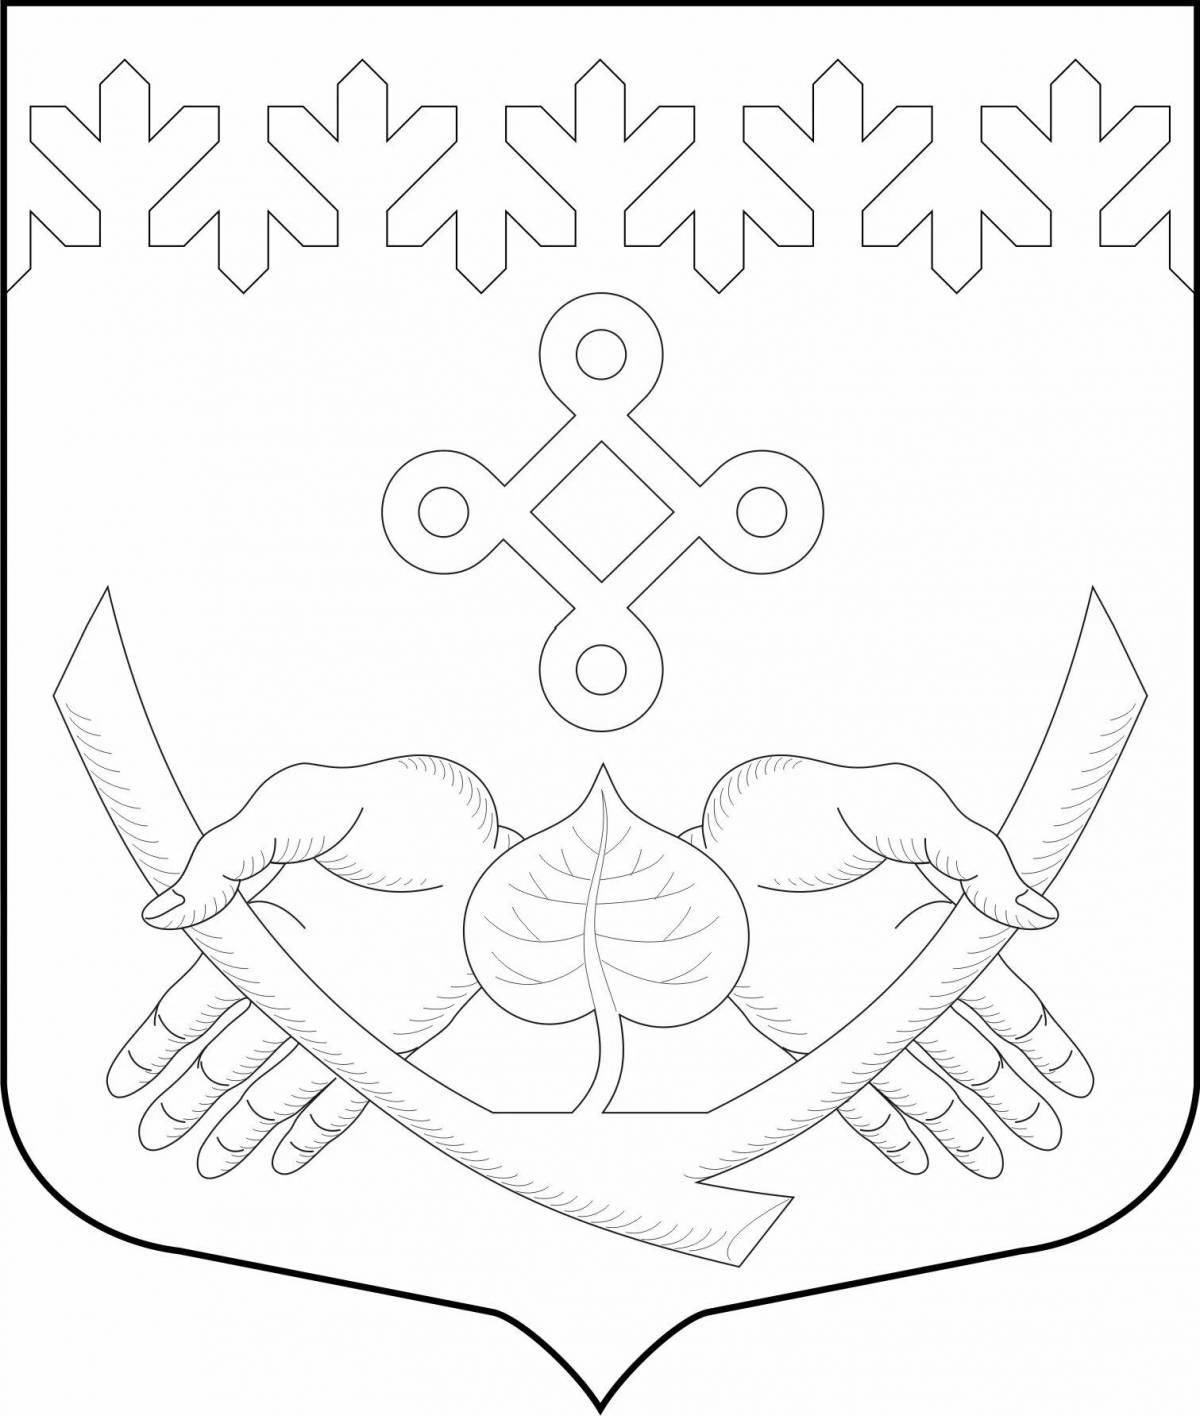 My family coat of arms #4